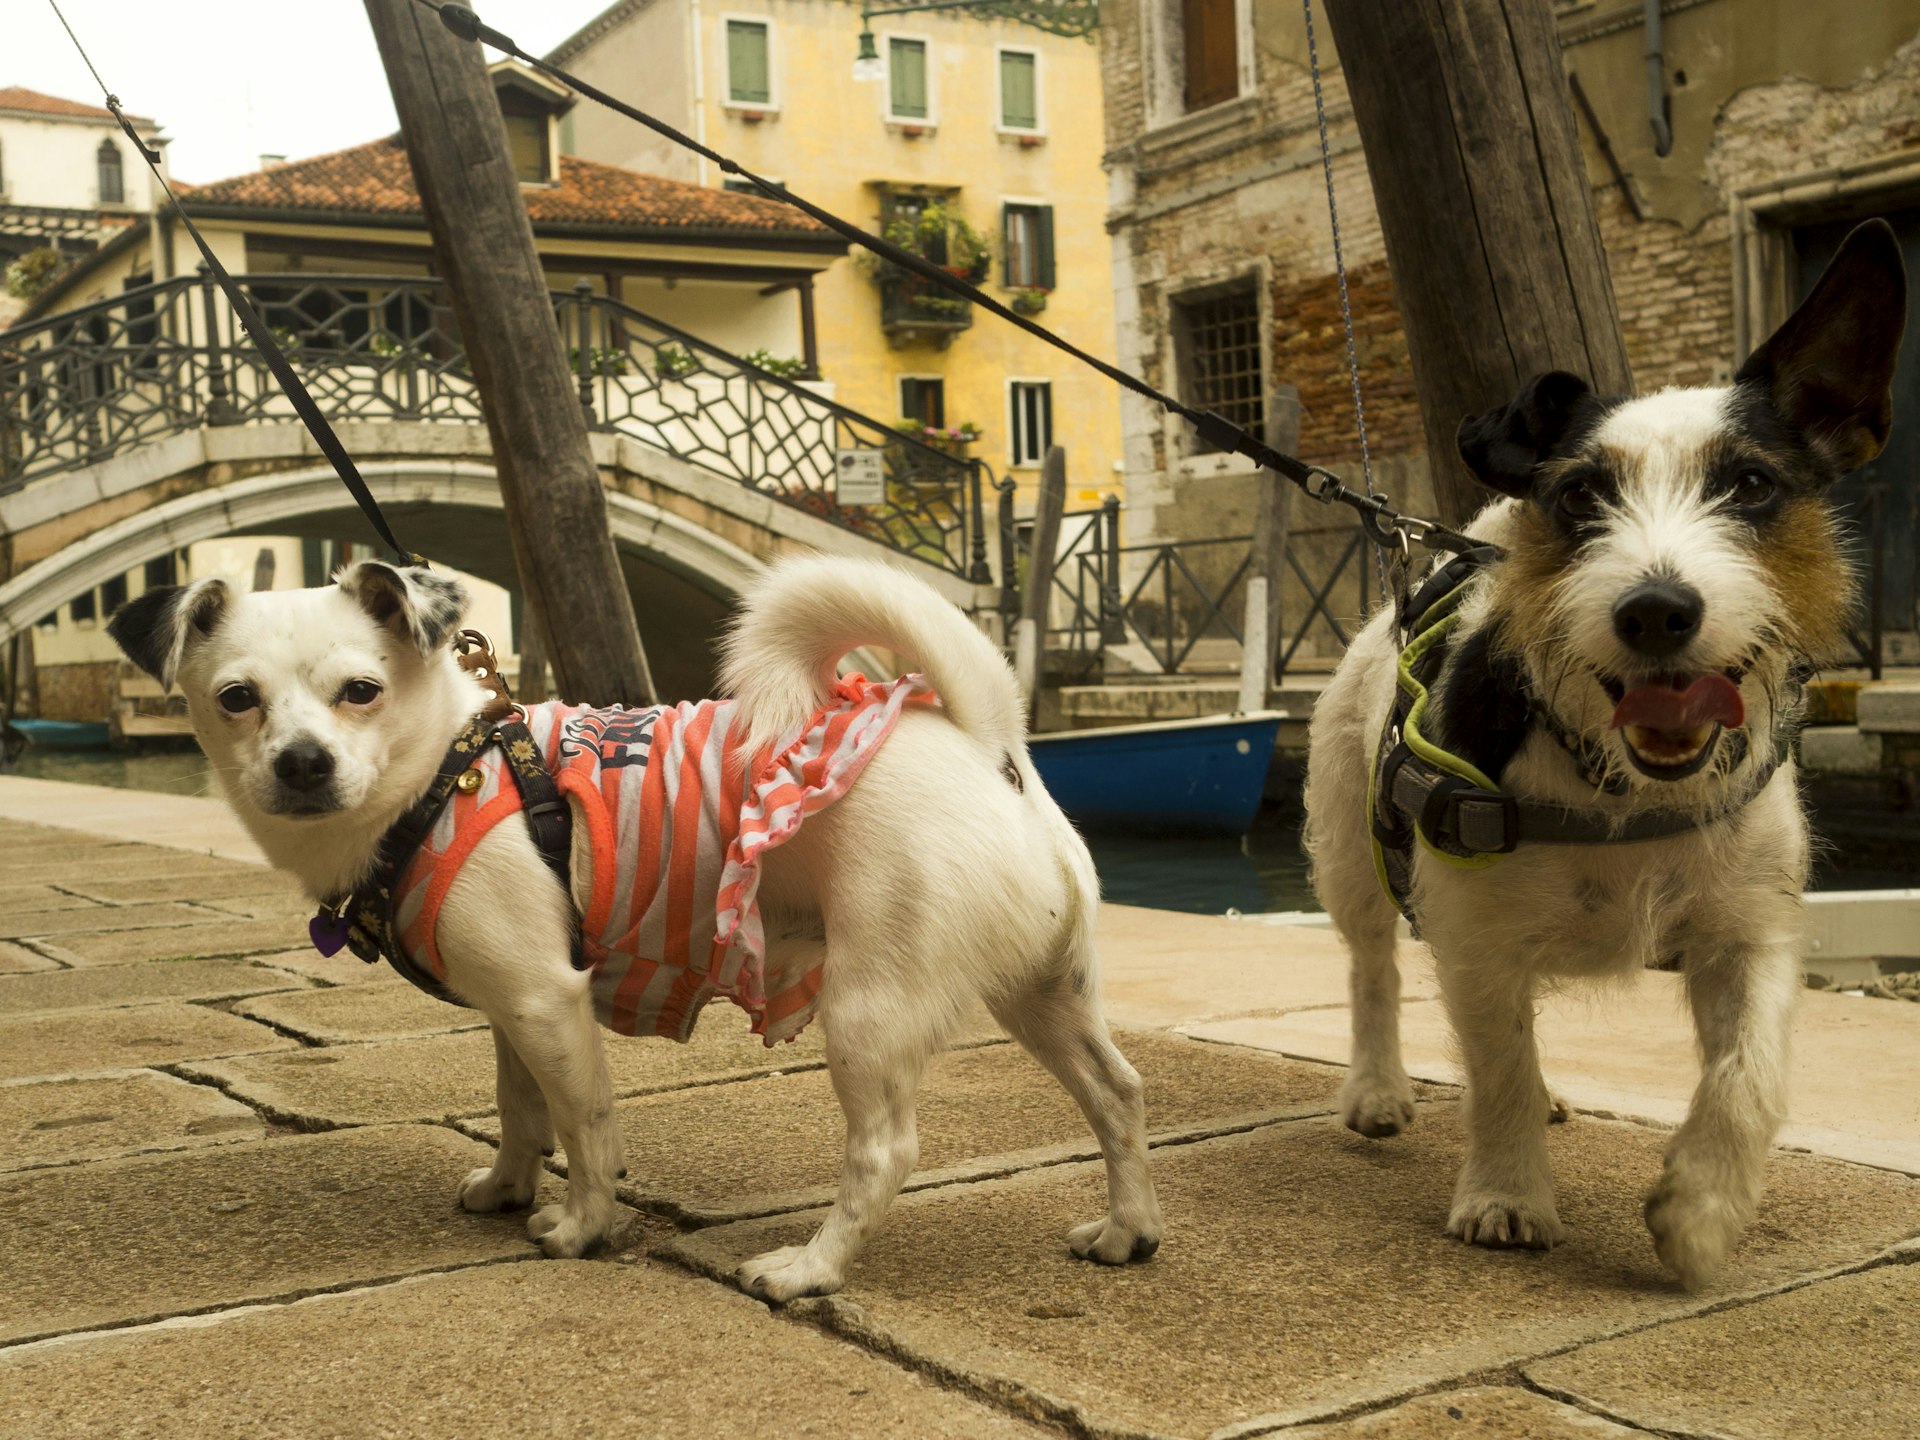 A close-up of two dogs on leashes in Venice, Italy